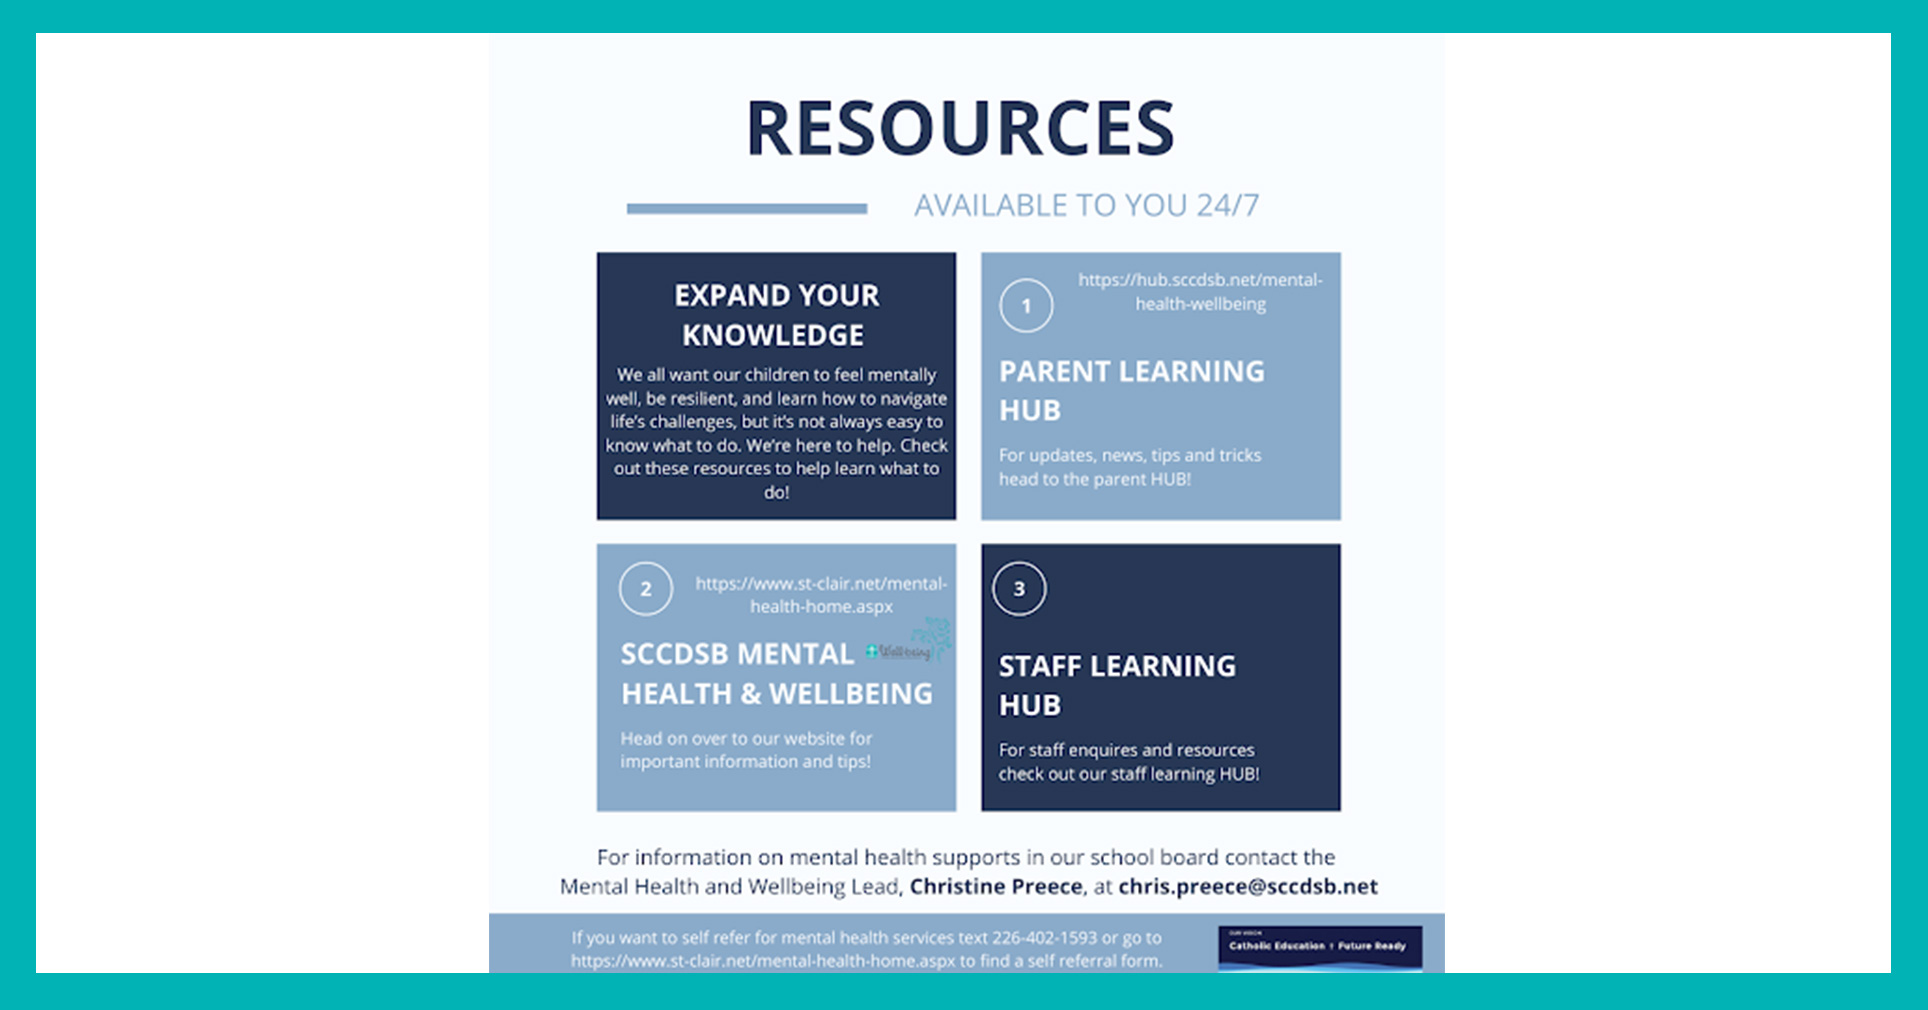 Need Support For Your Child or Your Family? Check Out These Resources…